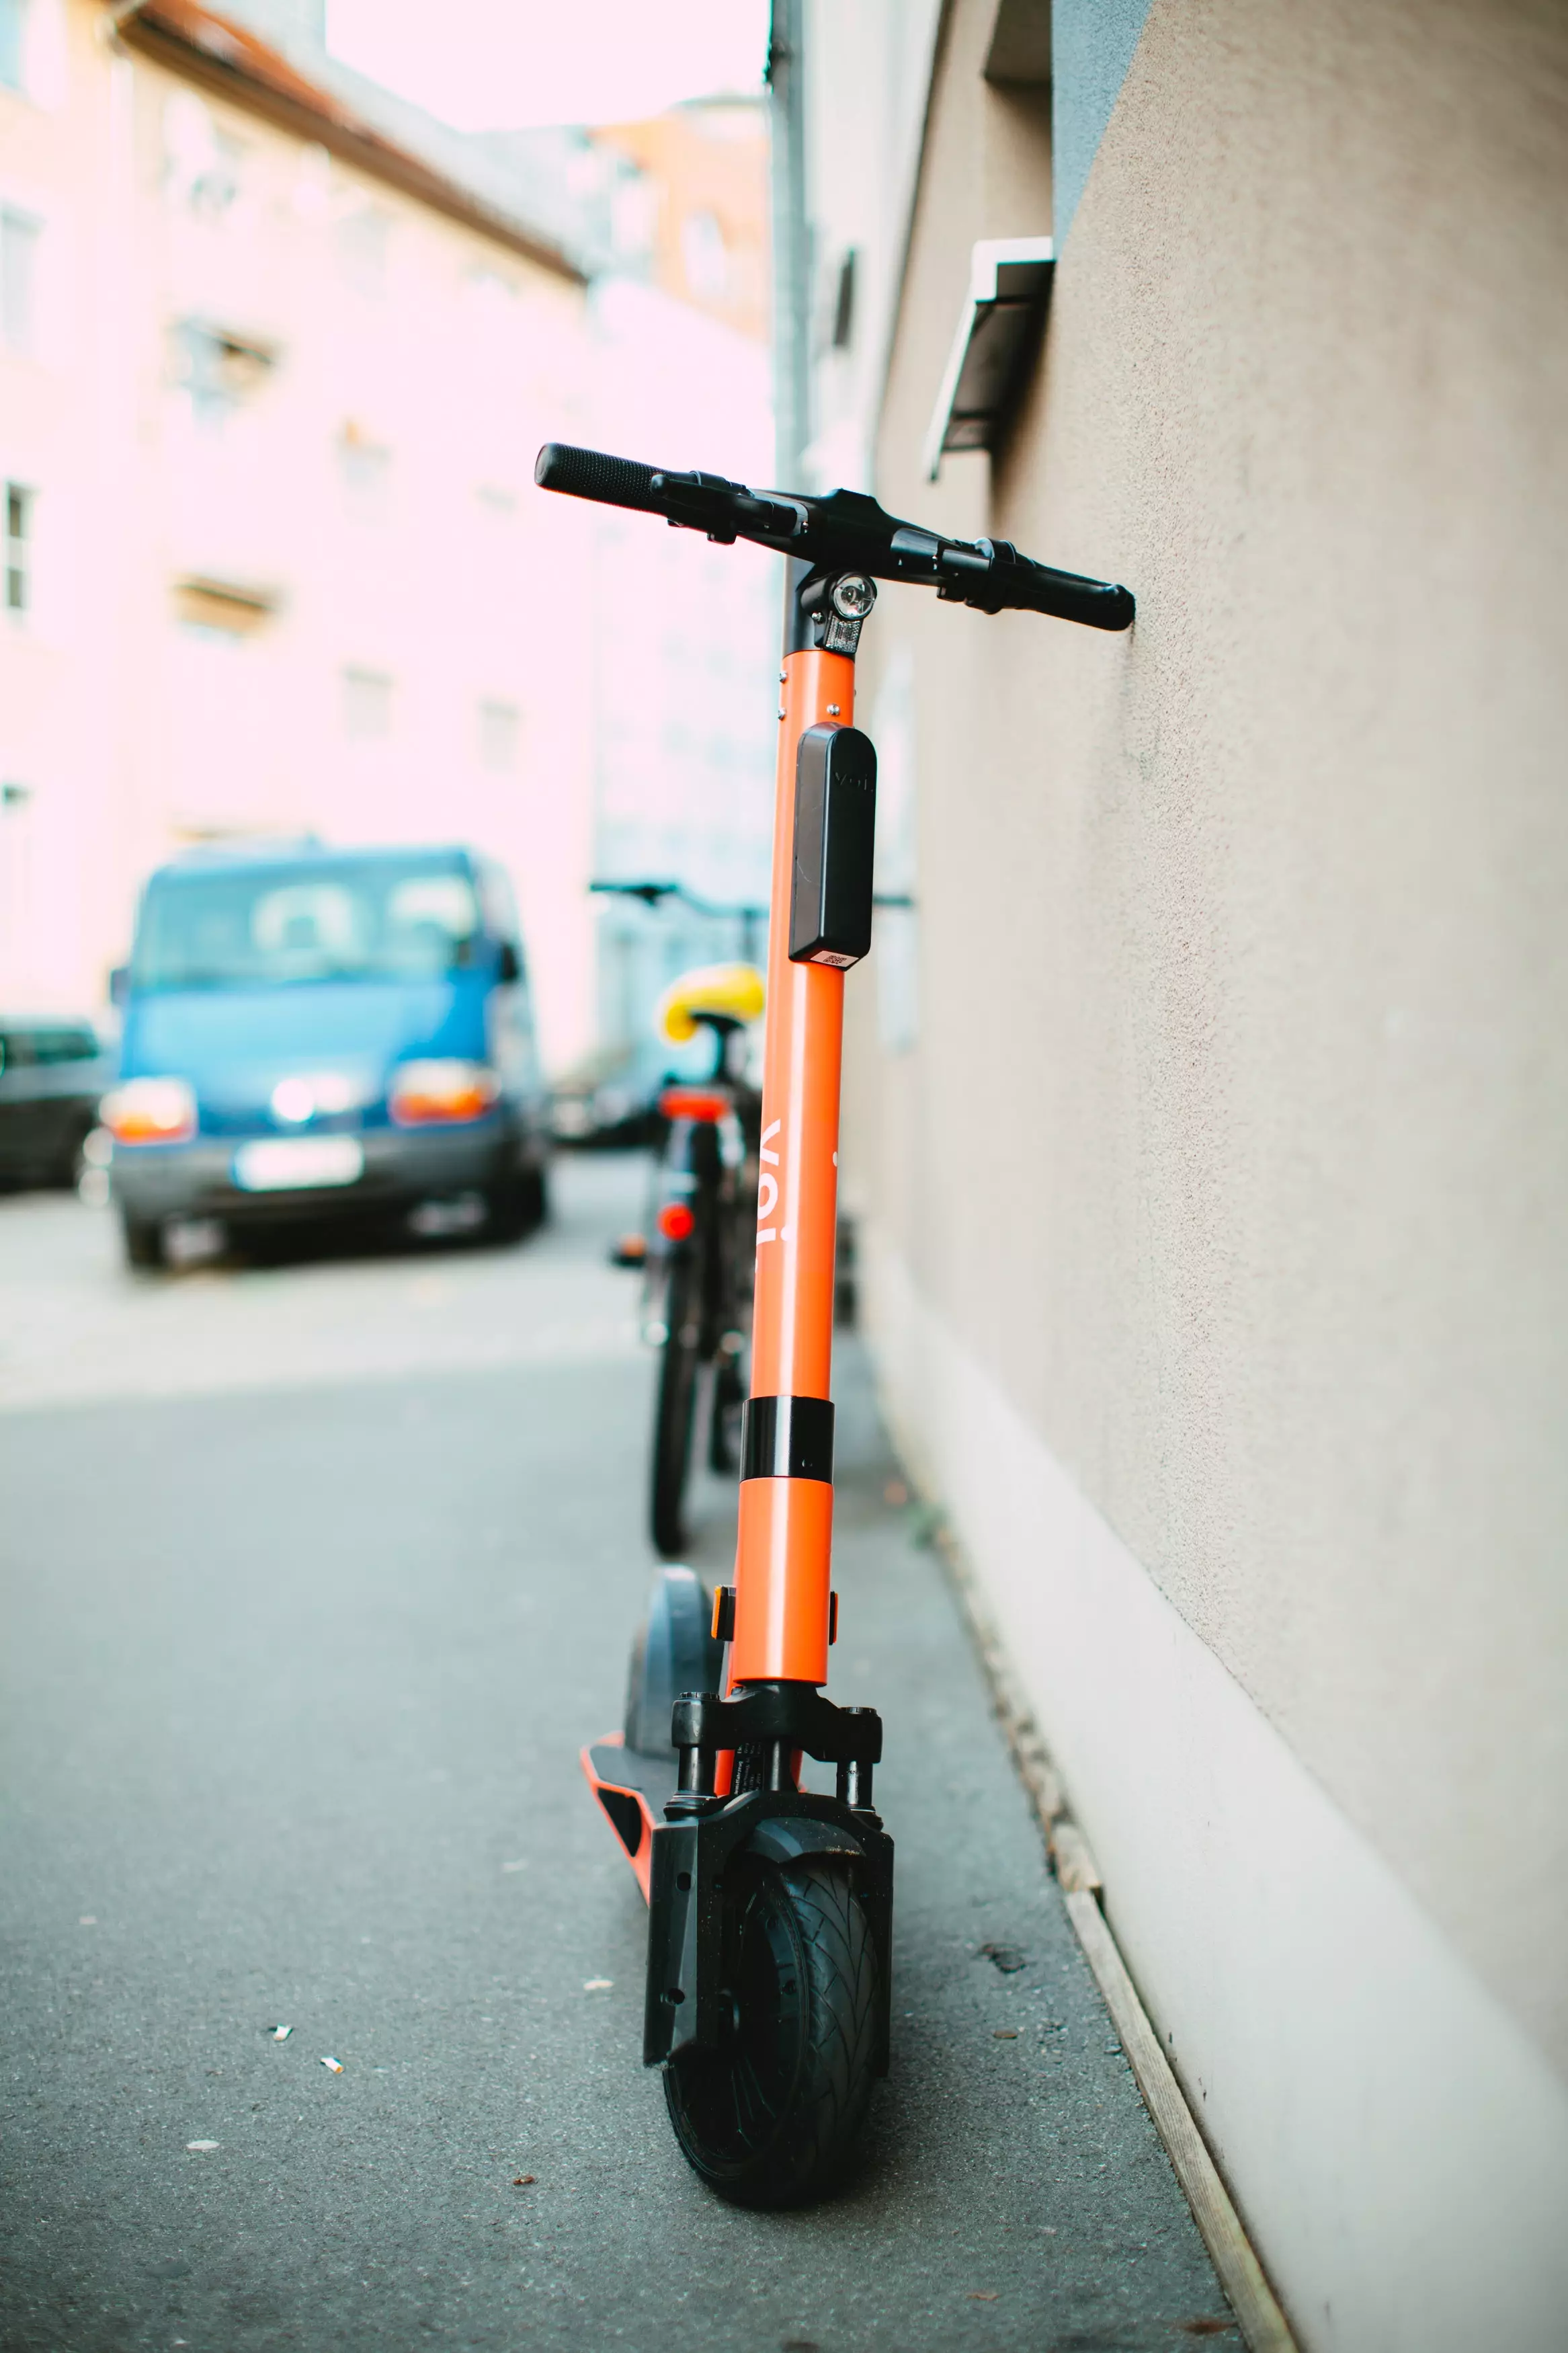 Stock image of e-scooter.